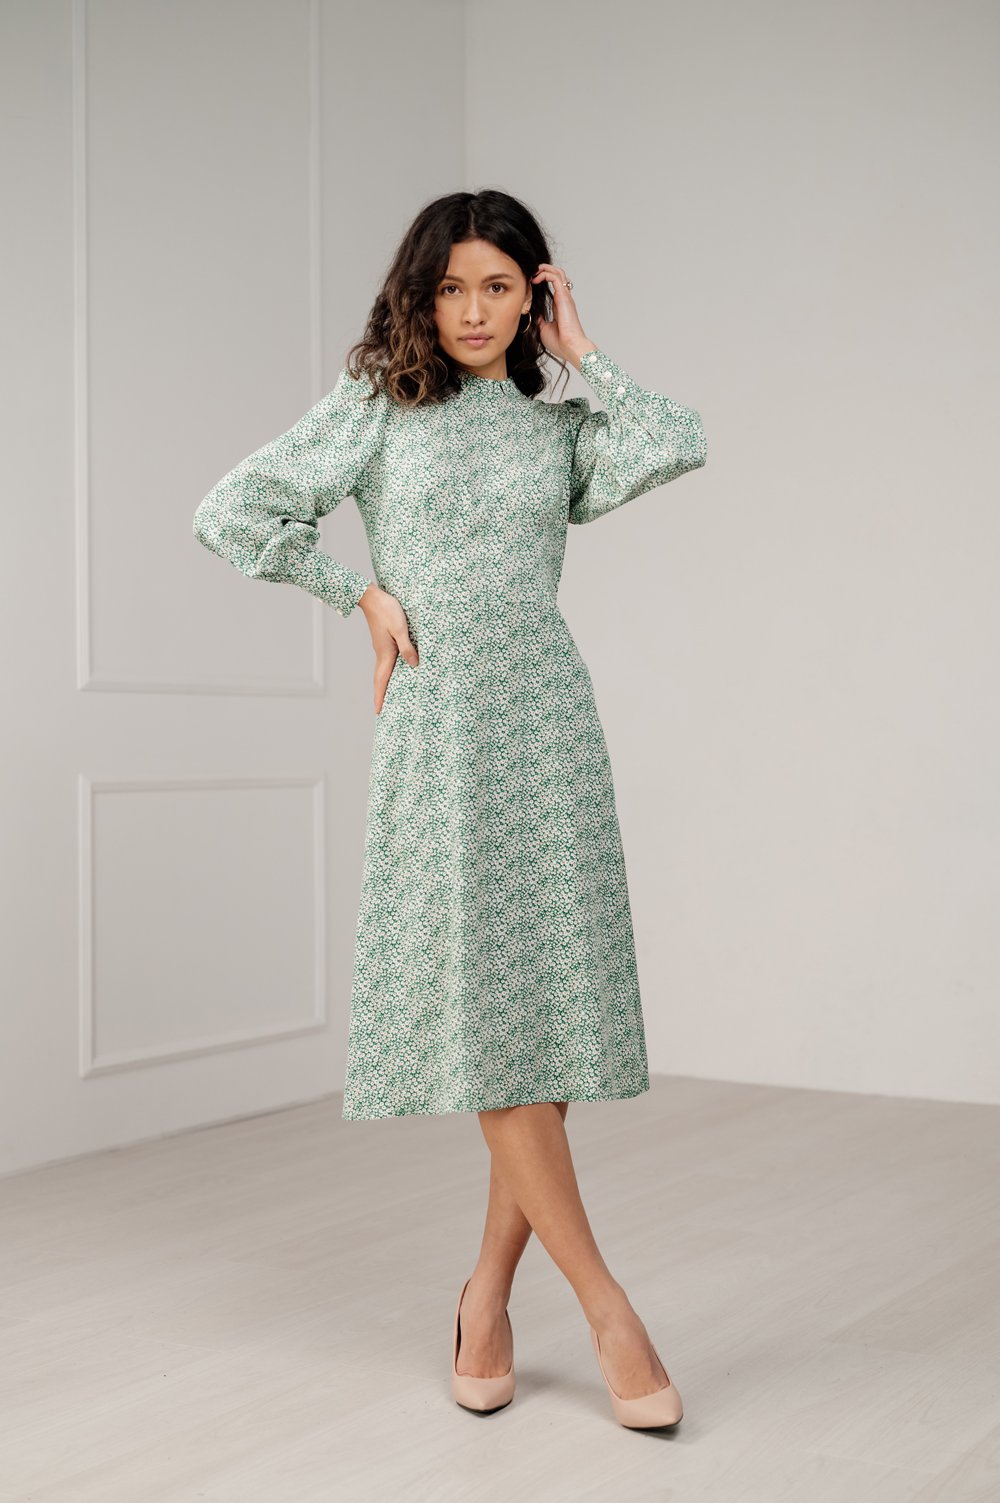 Dress with stand-up collar and delicate ruffles